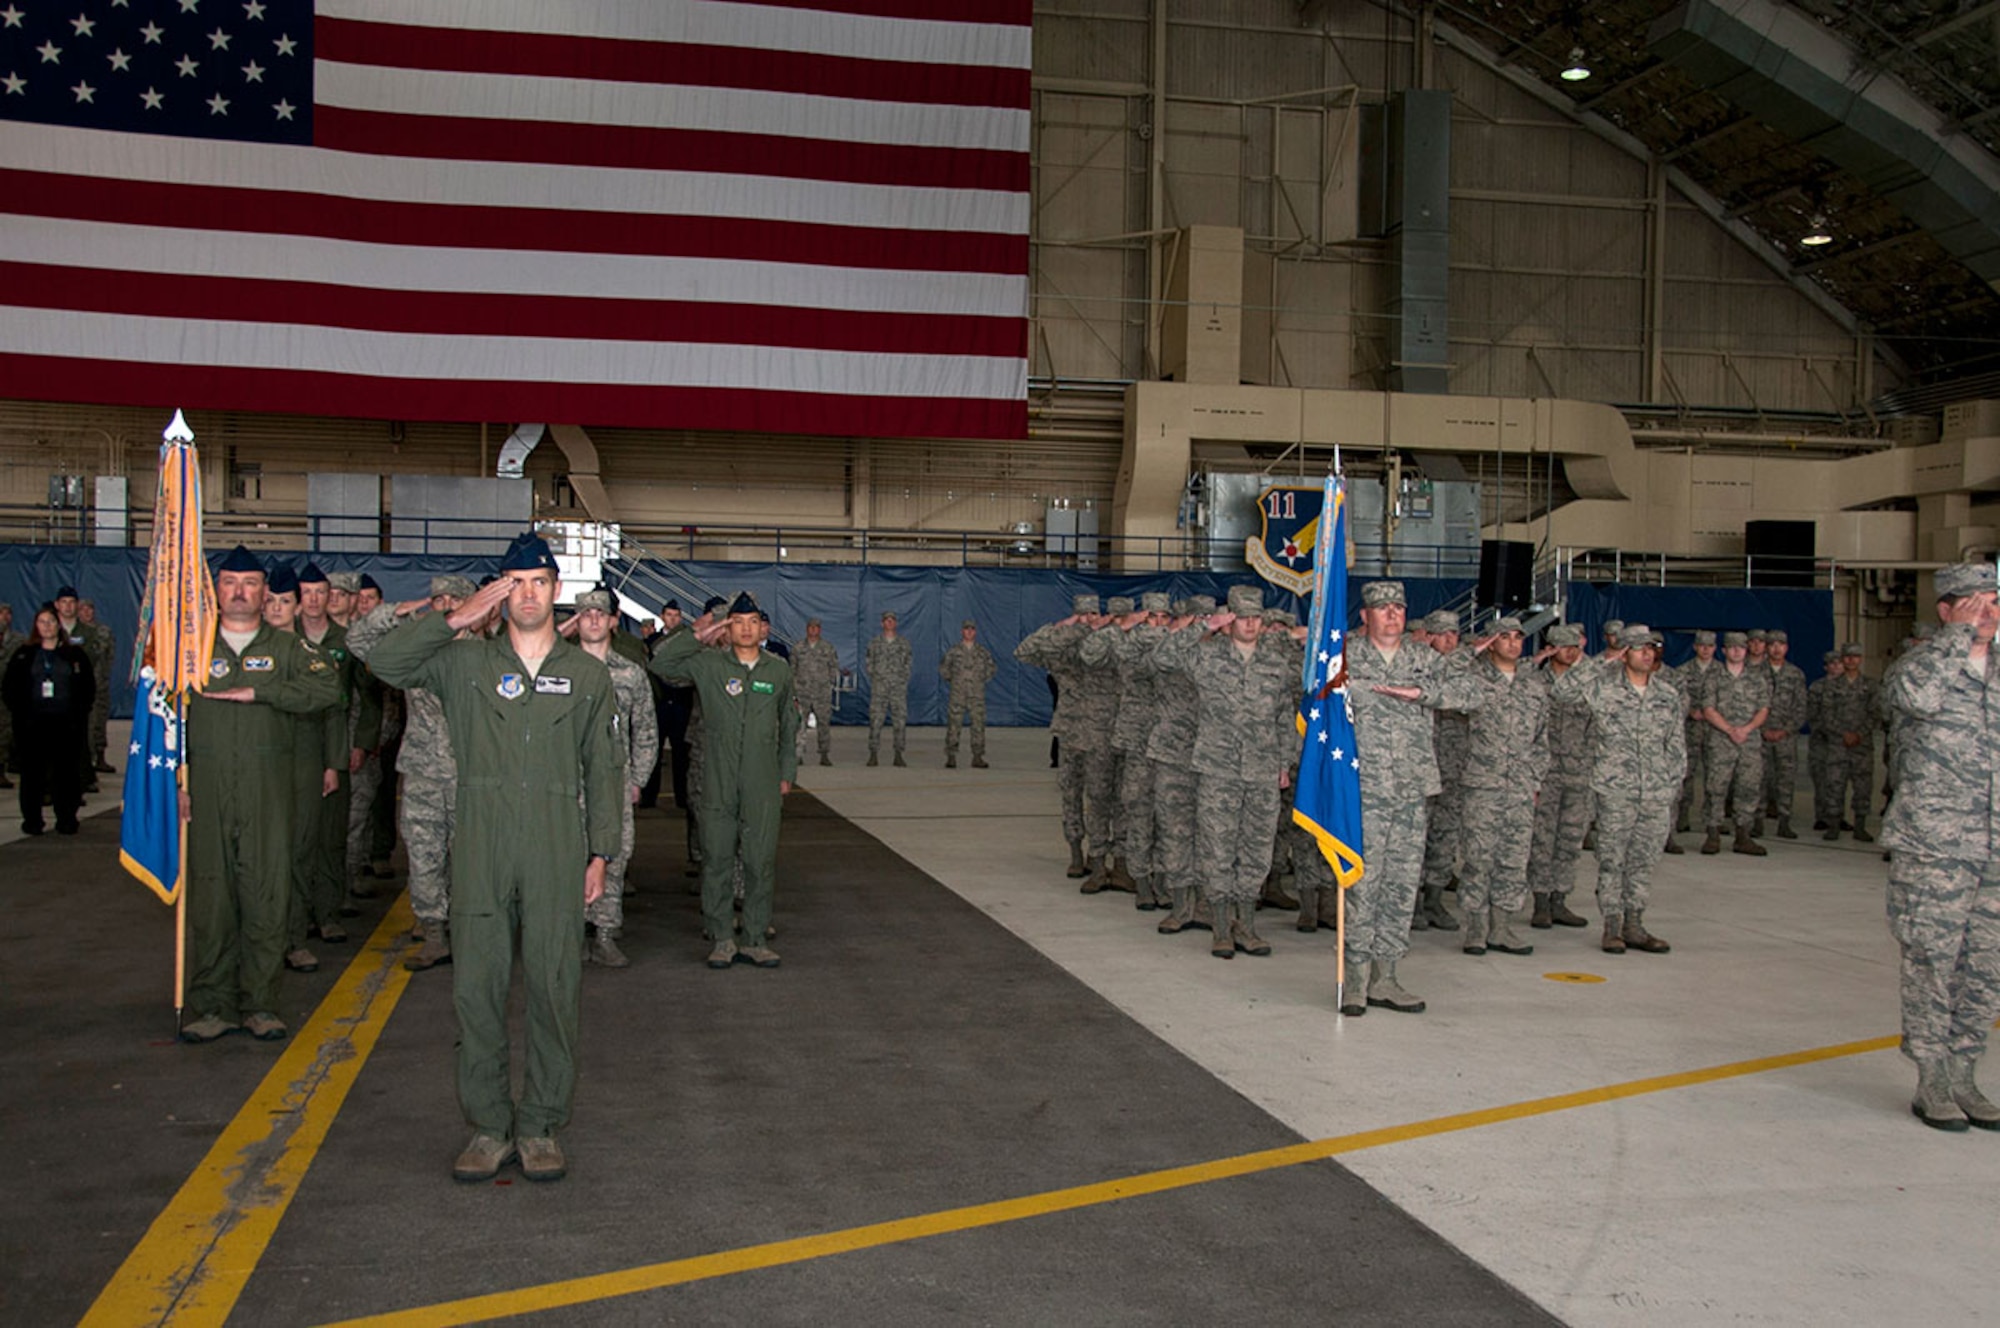 Airmen from the 3d Wing render Air Force Brig. Gen. David Nahom a final salute during the 3rd Wing change of command on JBER, Aug. 26. Nahom relinquished command of the 3rd Wing to Air Force Col. Charles Corcoran.  (U.S. Air Force photo/Airman 1st Class Tammie Ramsouer)